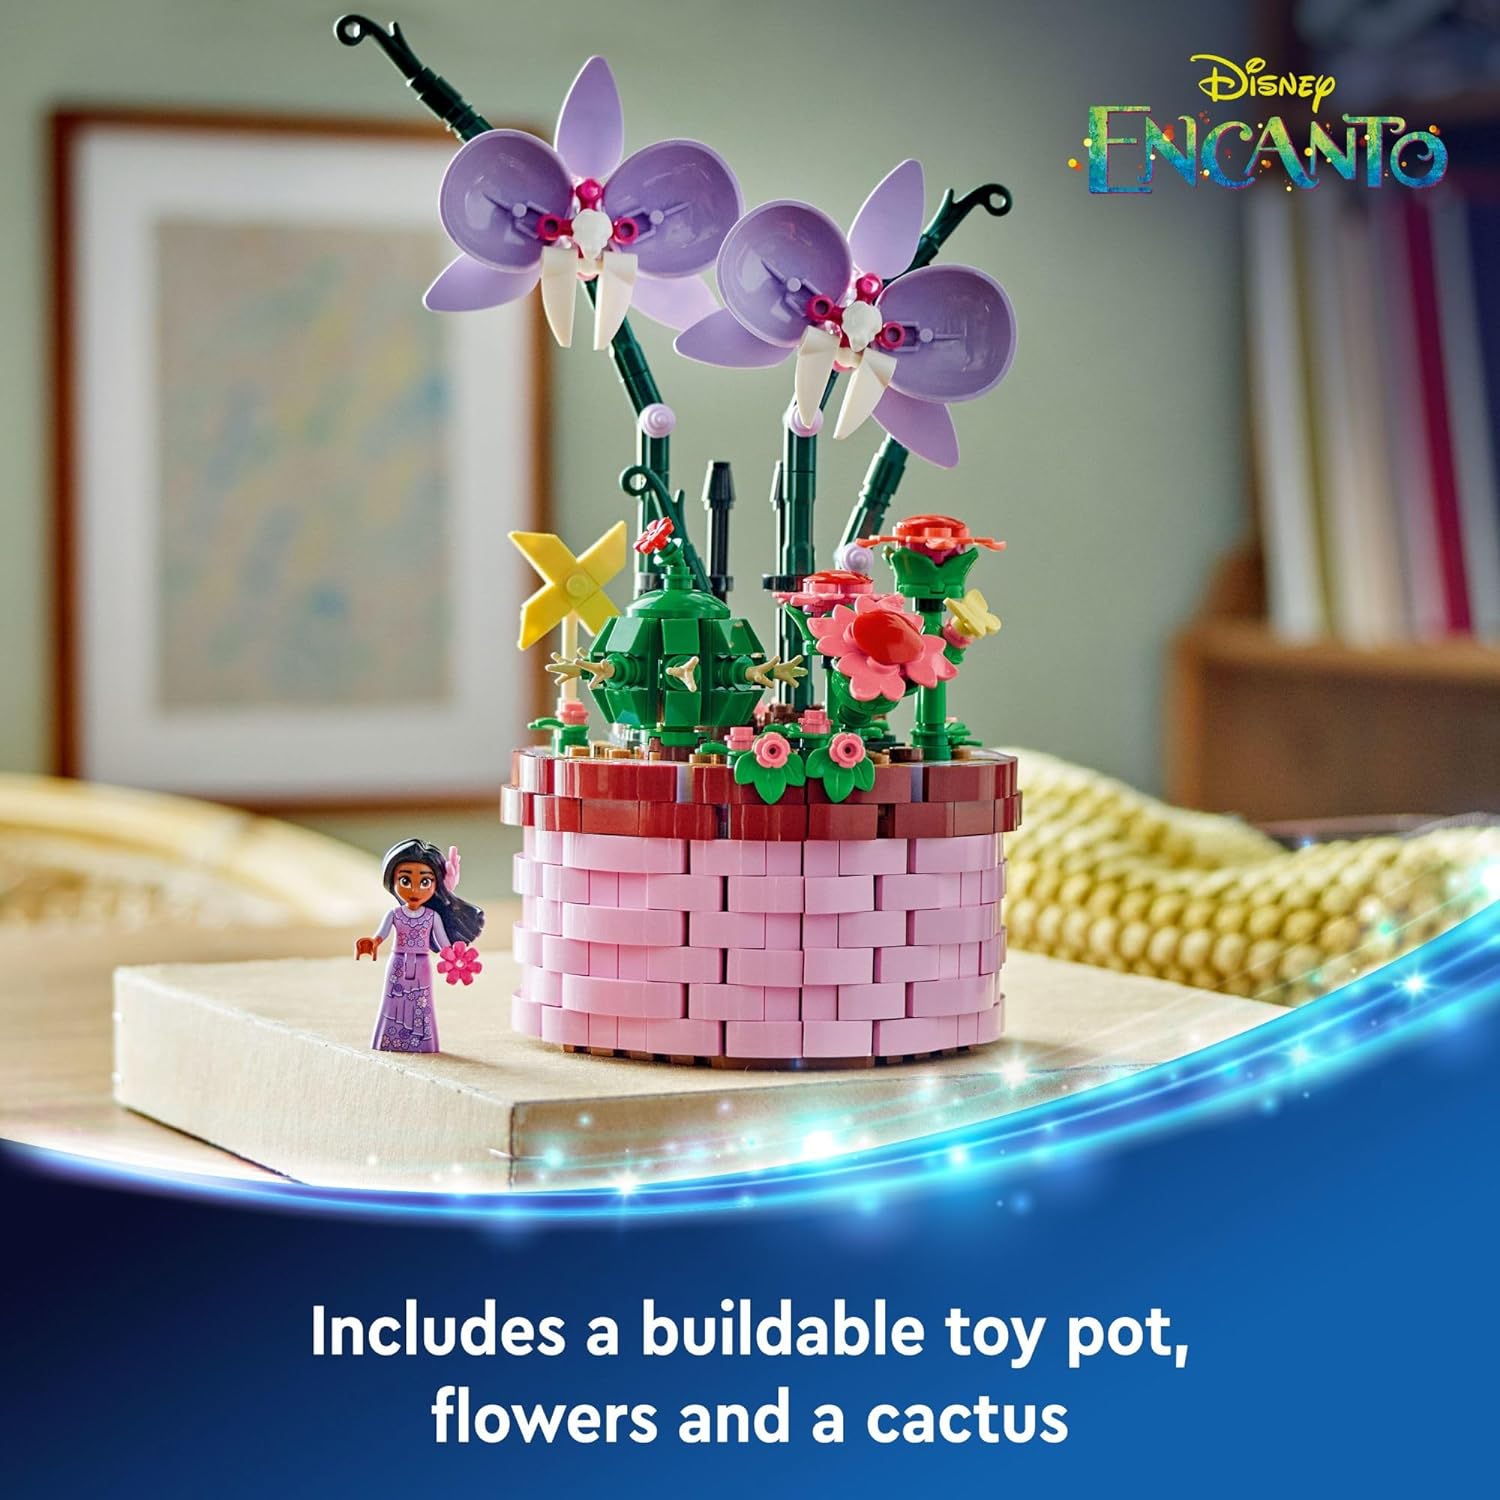 LEGO 43237 Disney Encanto Isabela’s Flowerpot, Buildable Orchid Flower Toy for Kids with Disney Encanto Mini-Doll, Disney Toy for Play and Display.